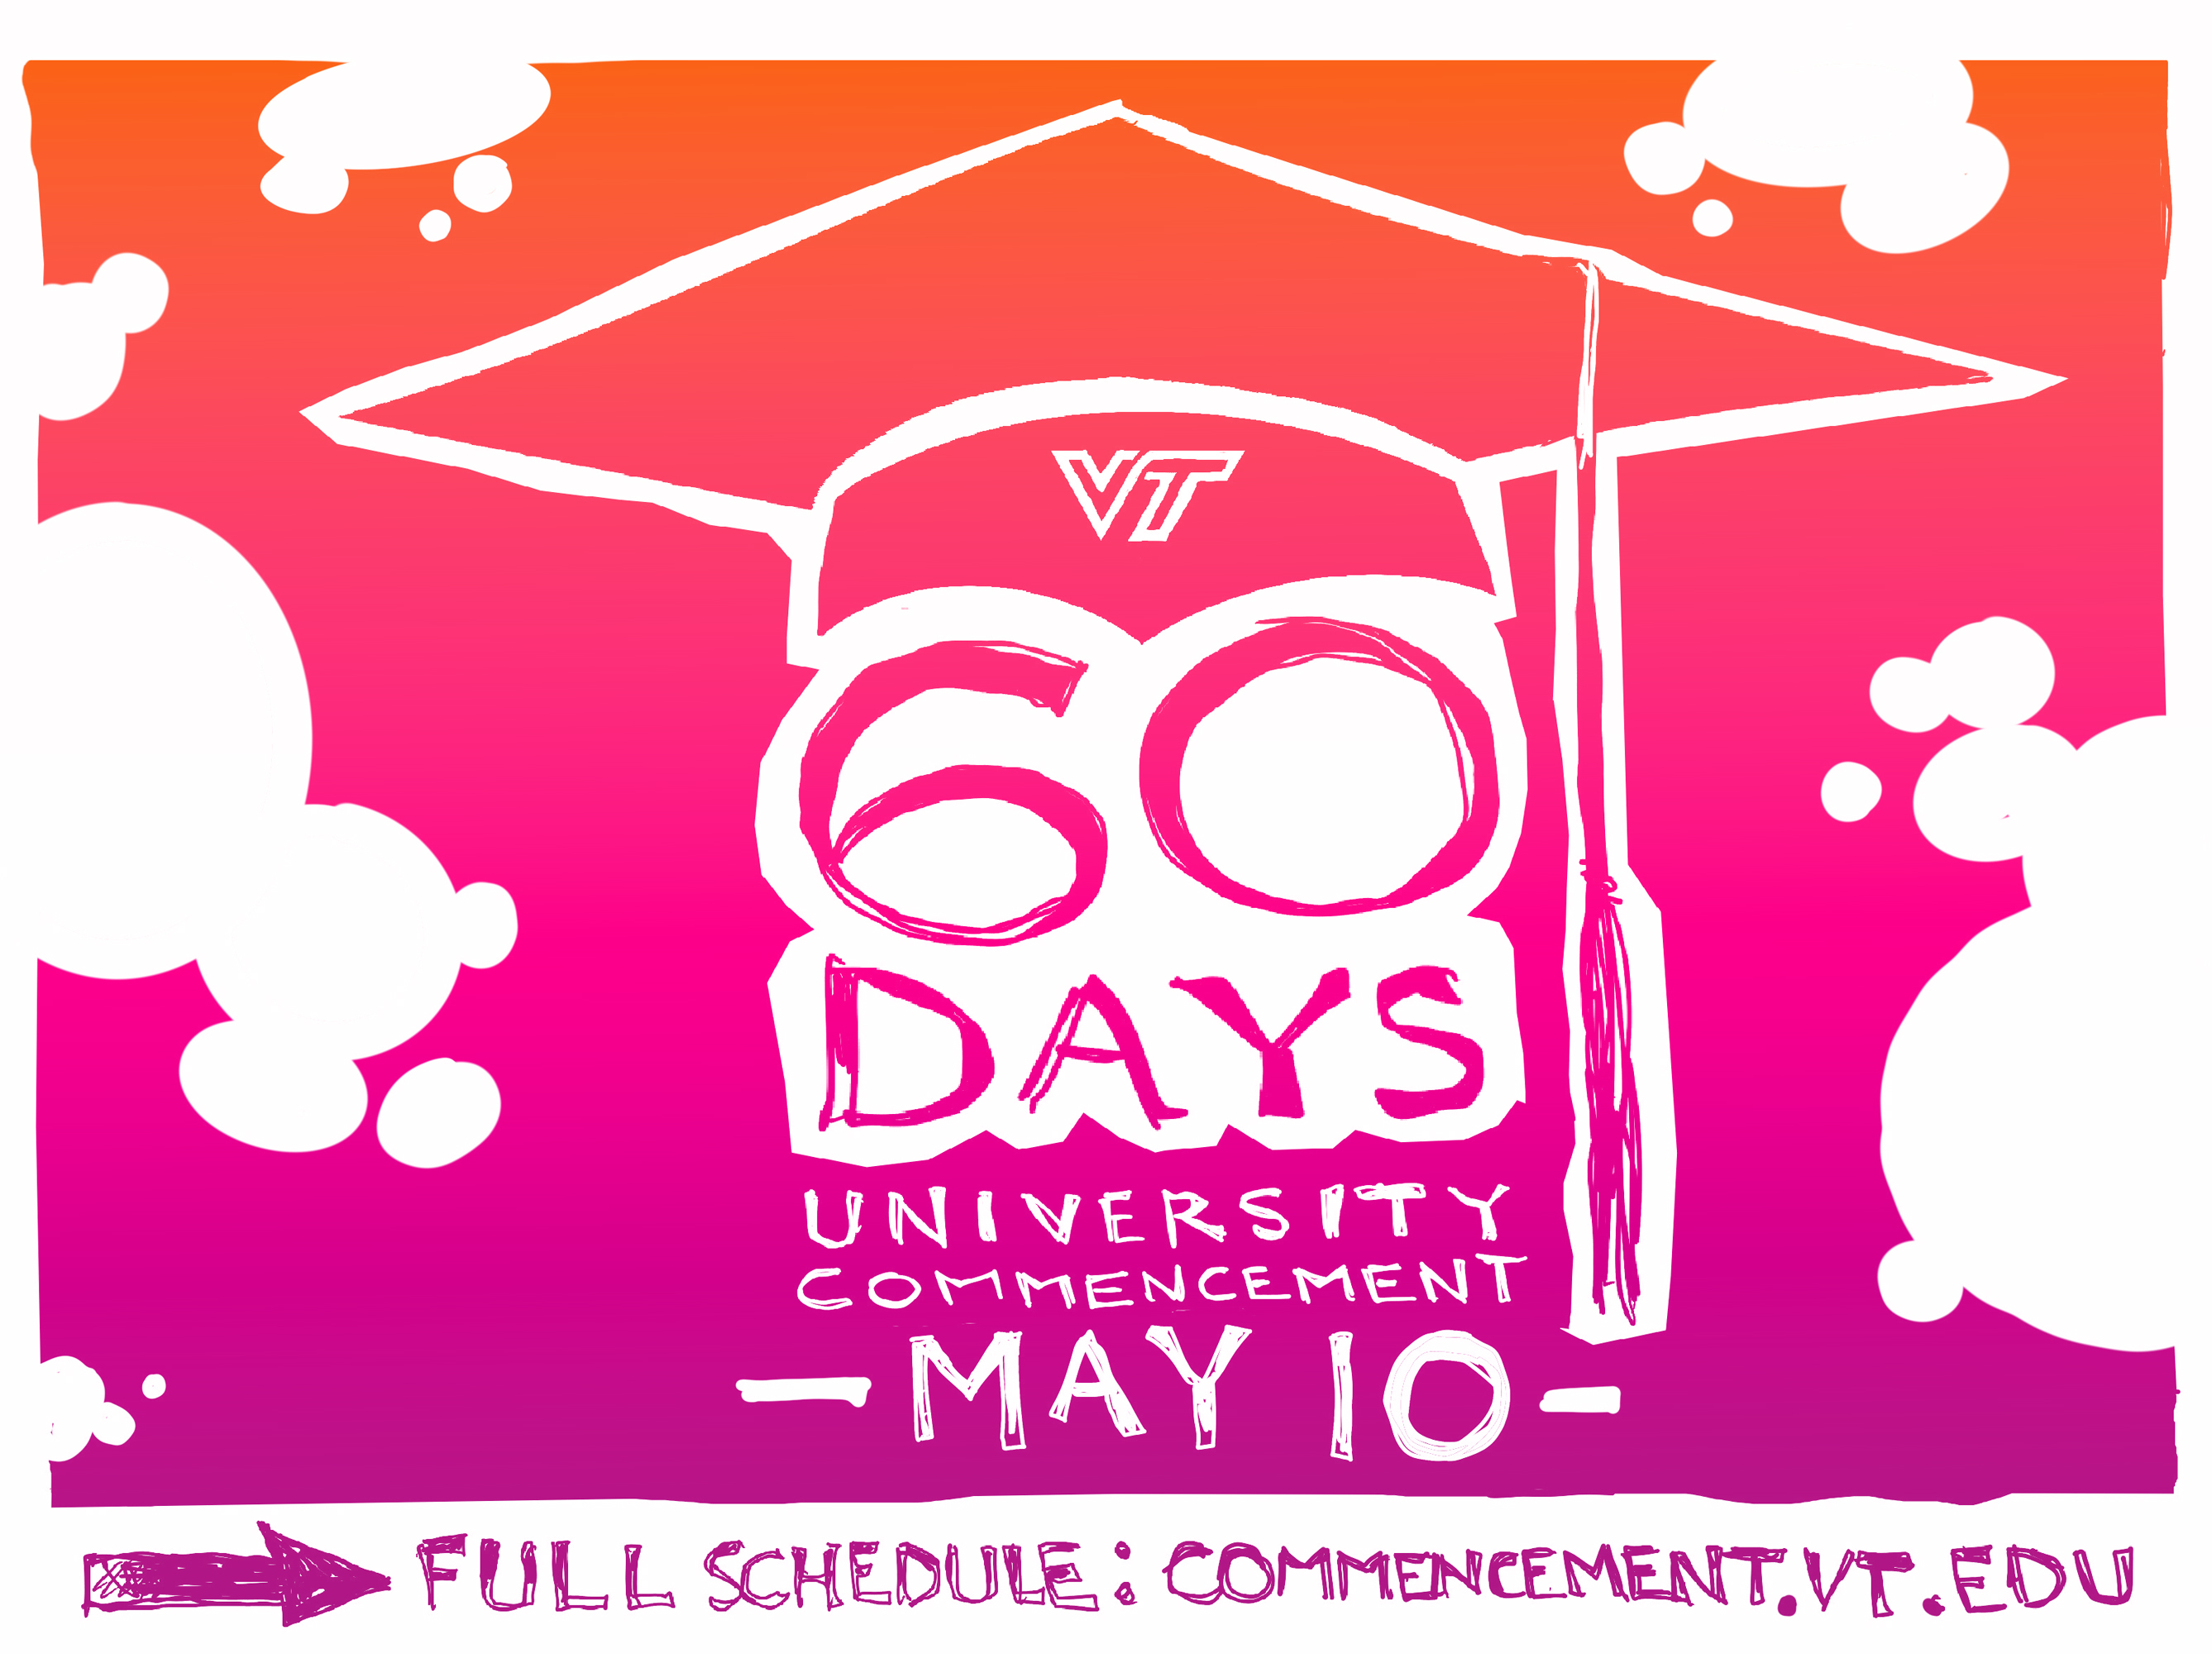 Digital sketch reminder that University Commencement is just 60 days away